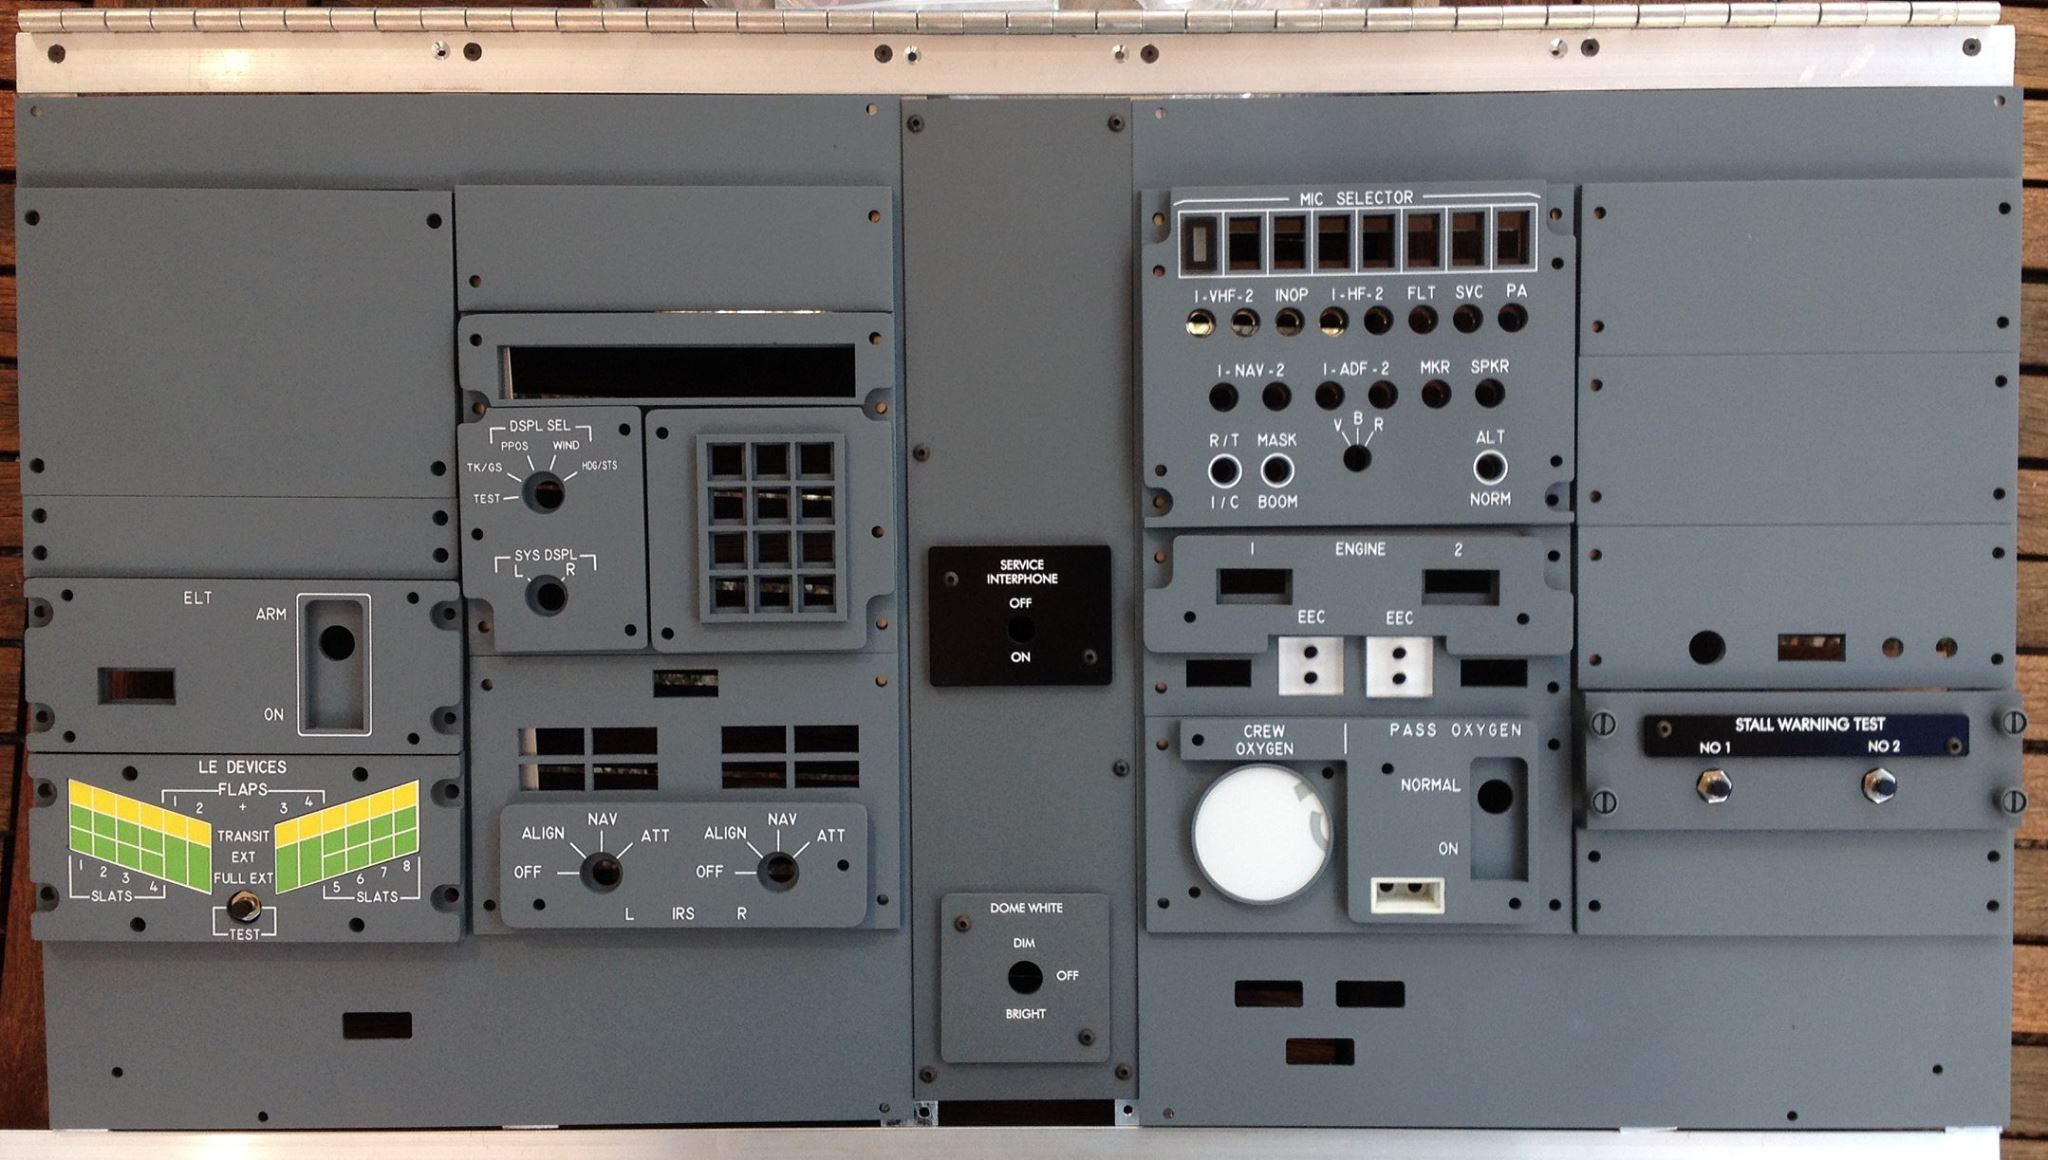 AFT overhead panel only panels